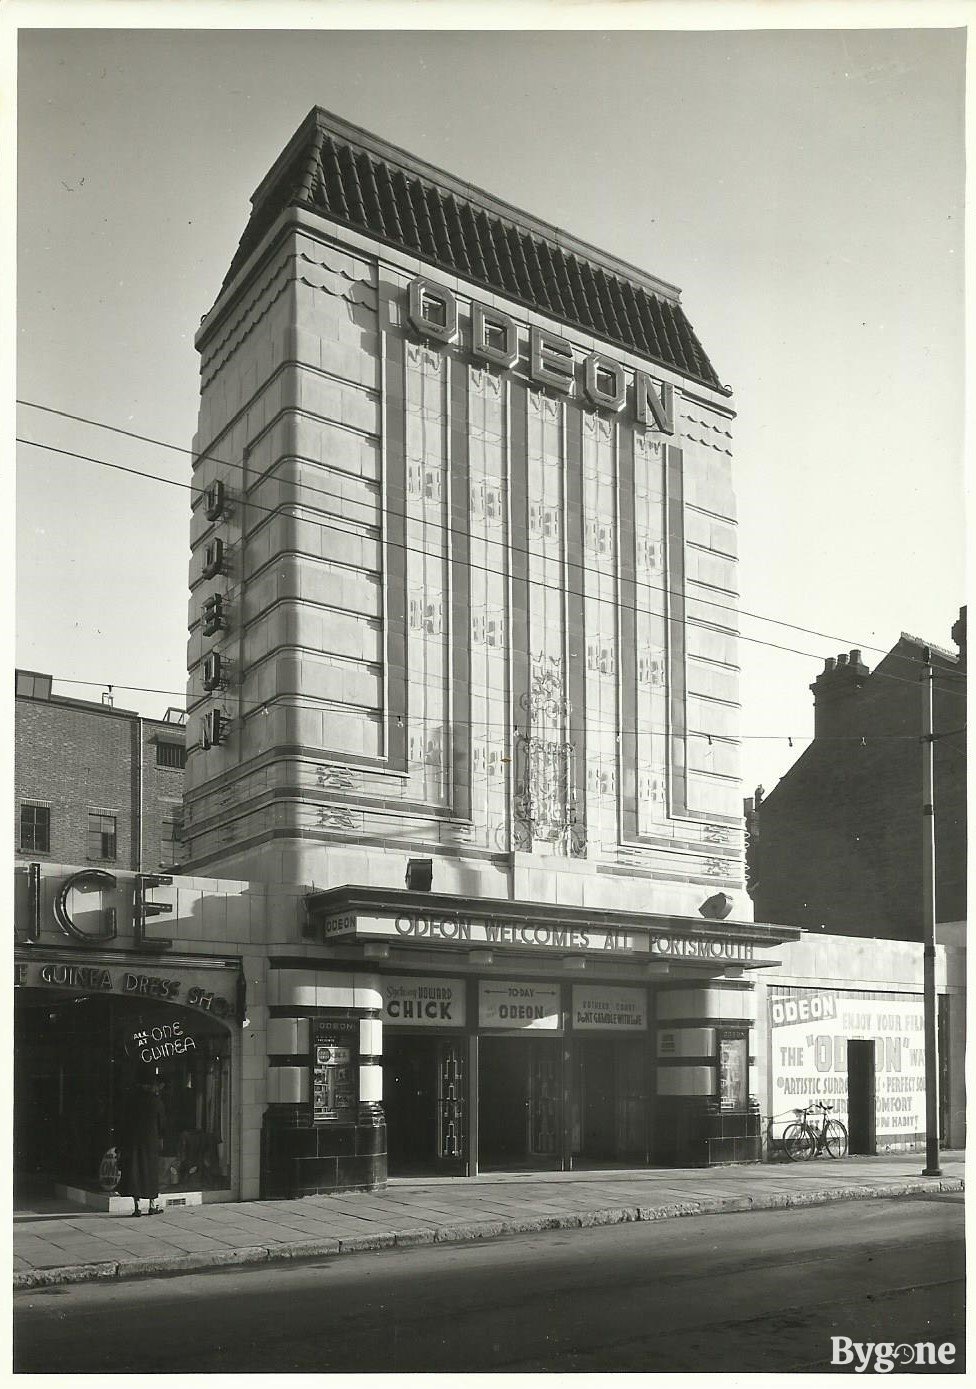 The Odeon Cinema, North End